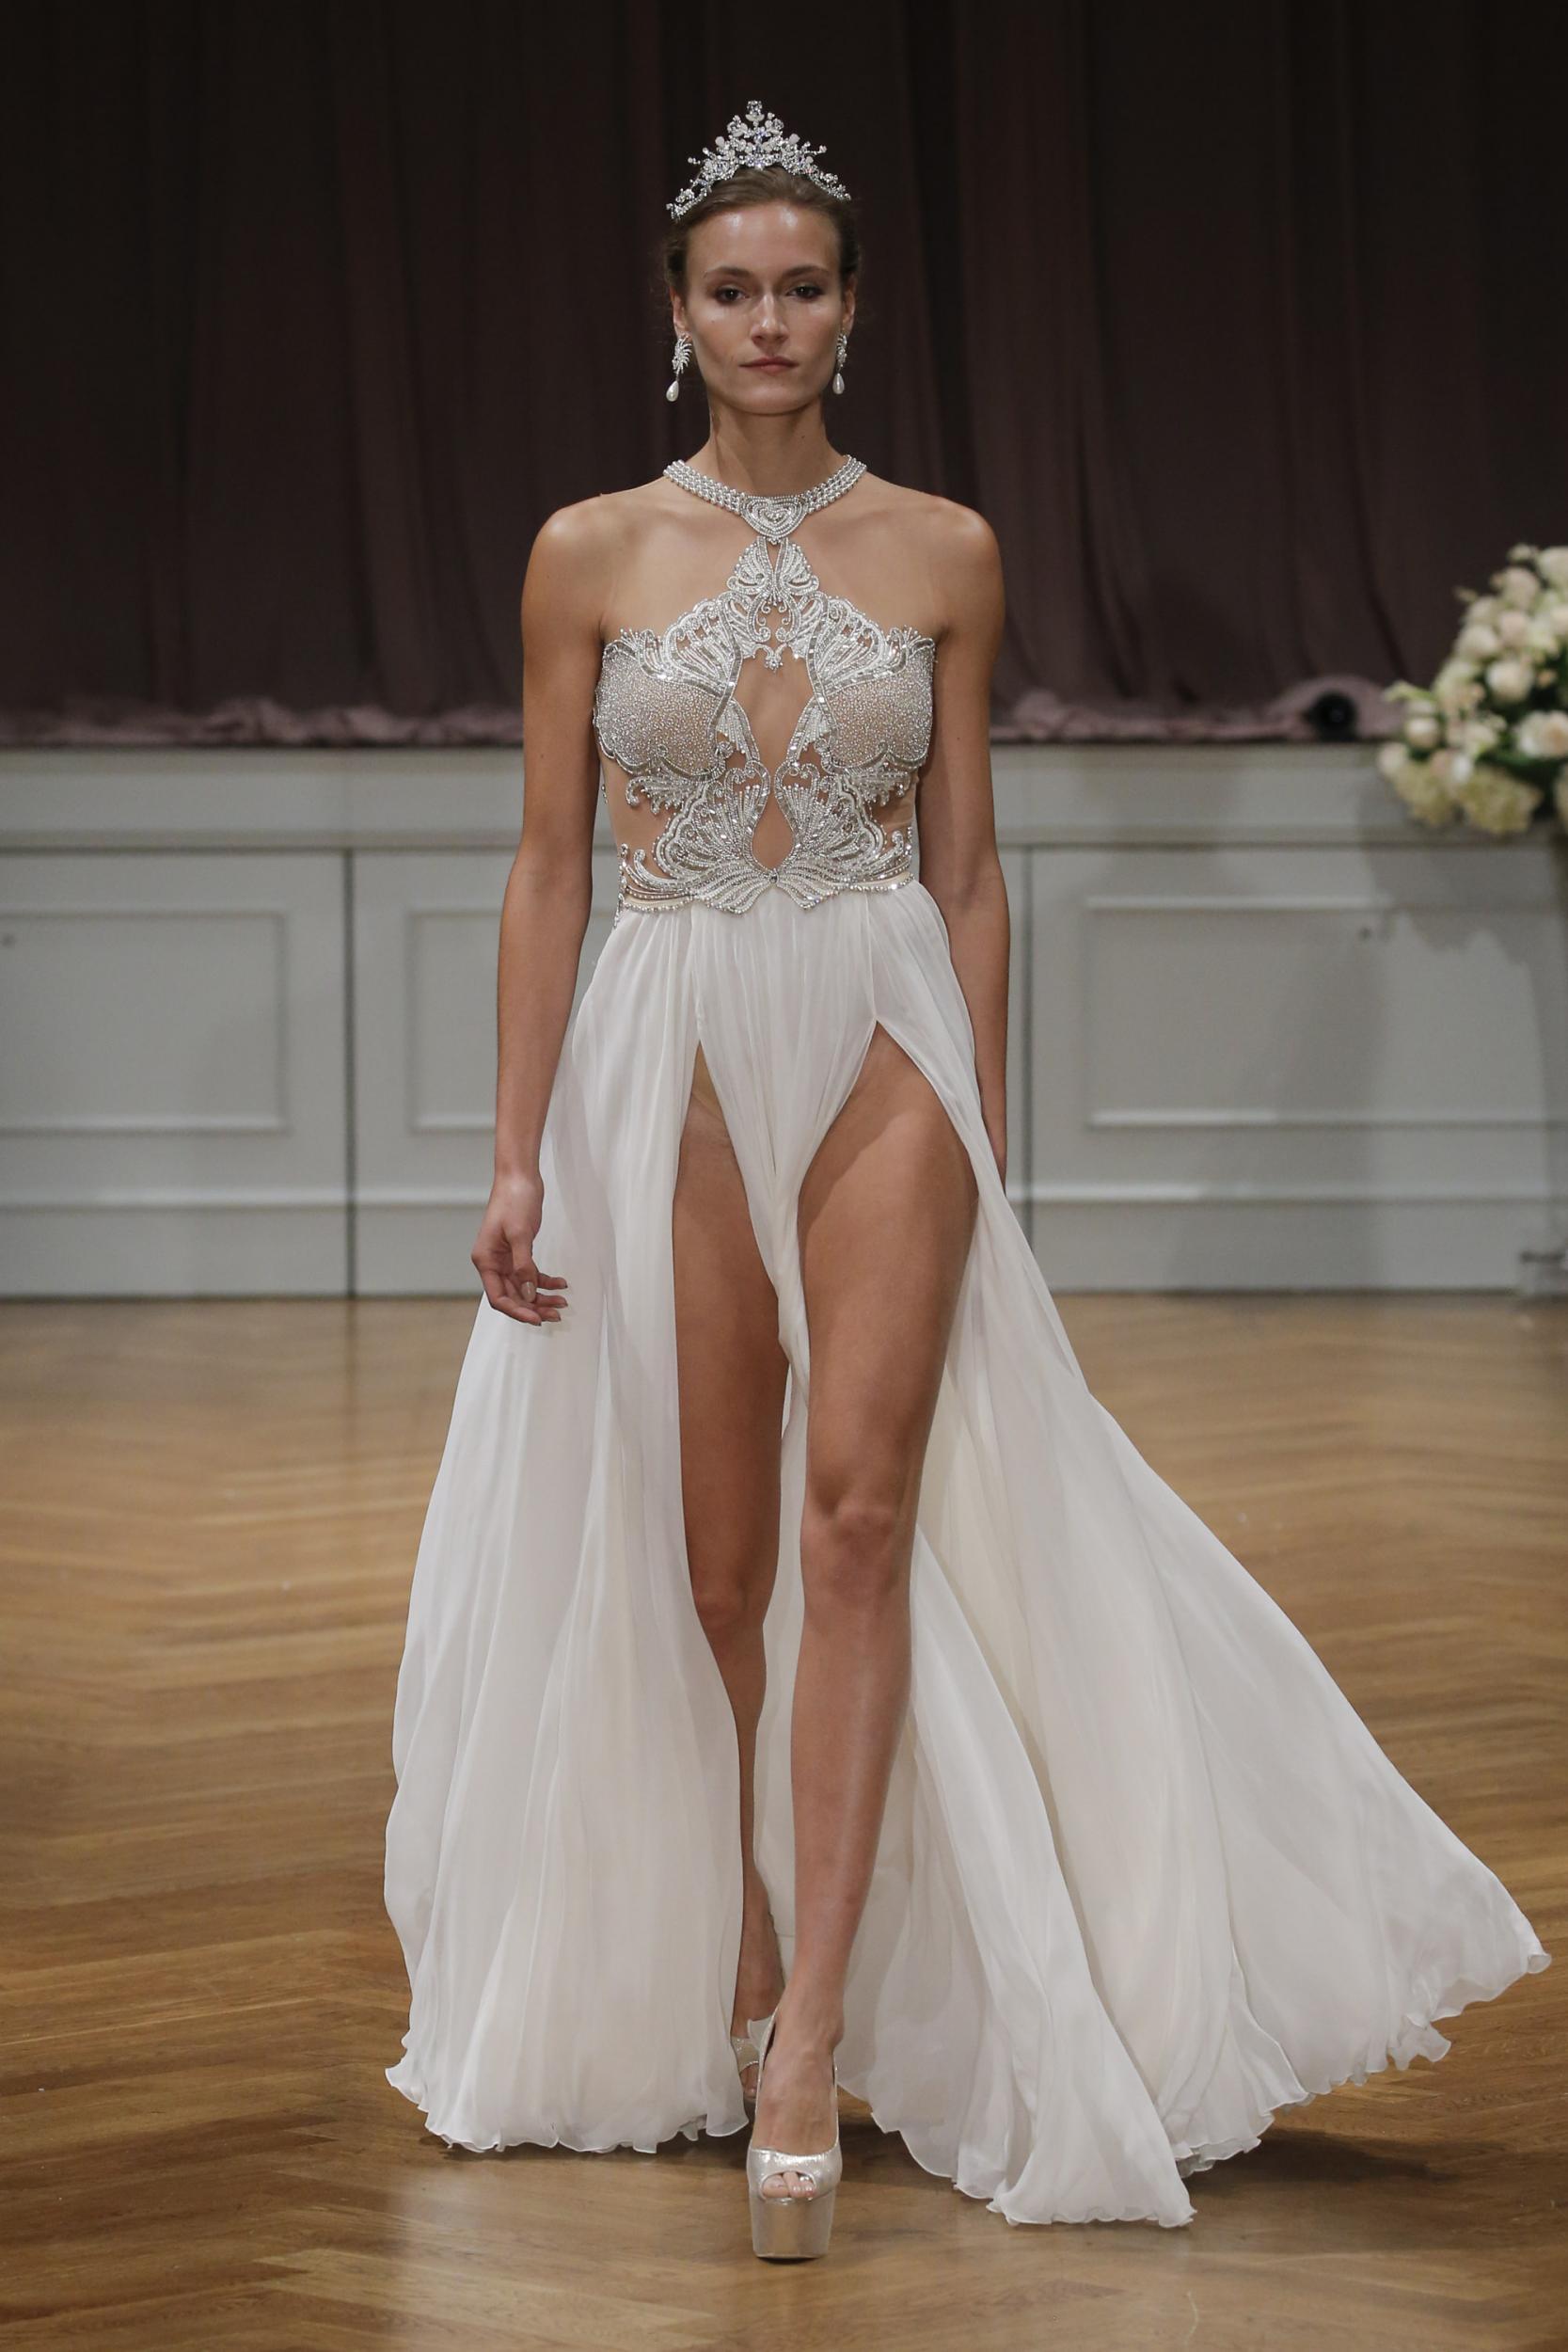 The designer's Venus dress showcases a flowing white skirt with two hip-high slits